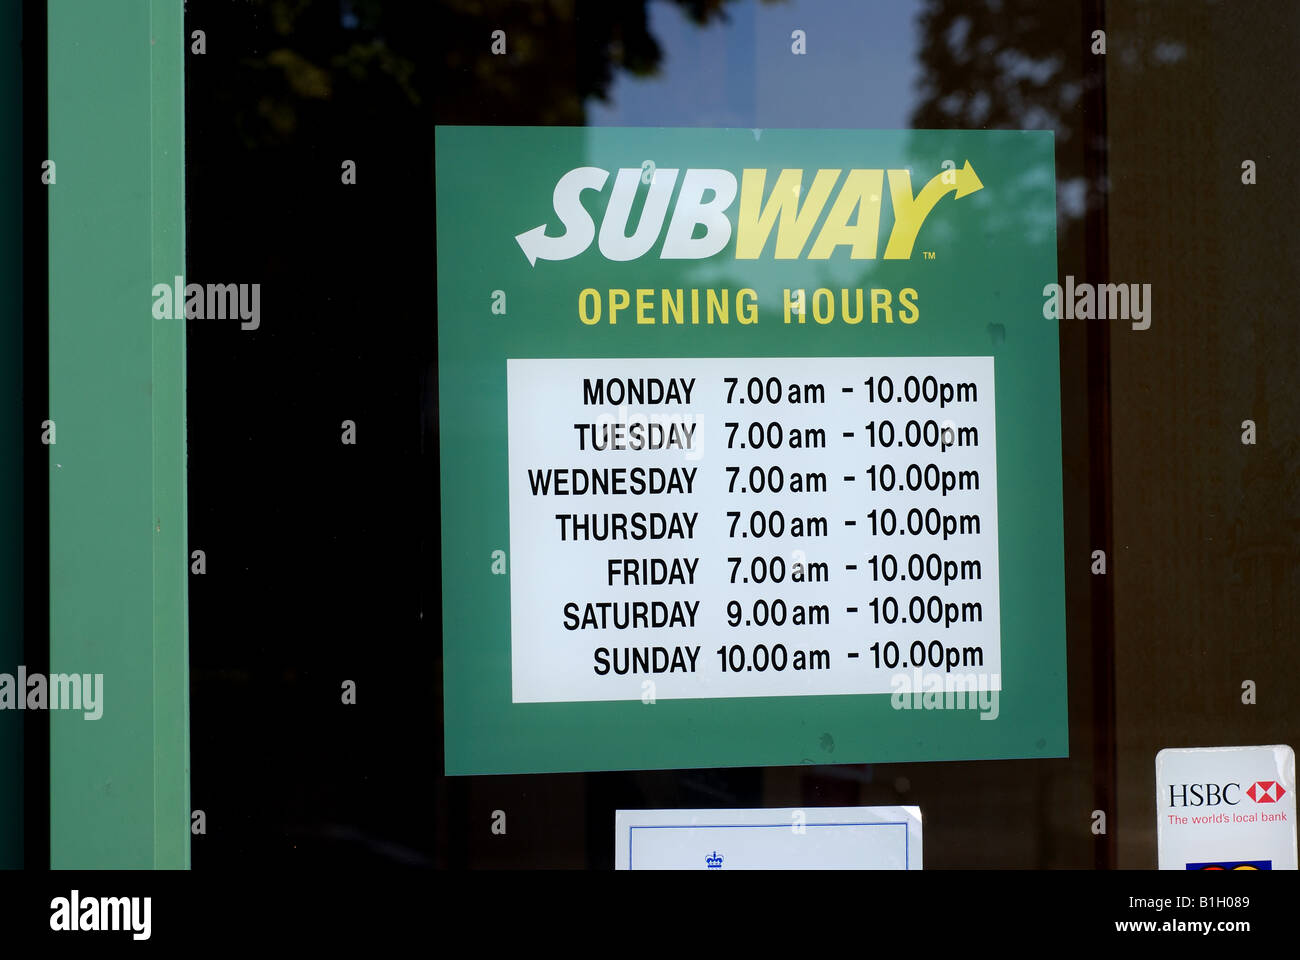 Subway food outlet opening hours sign, UK Stock Photo ...